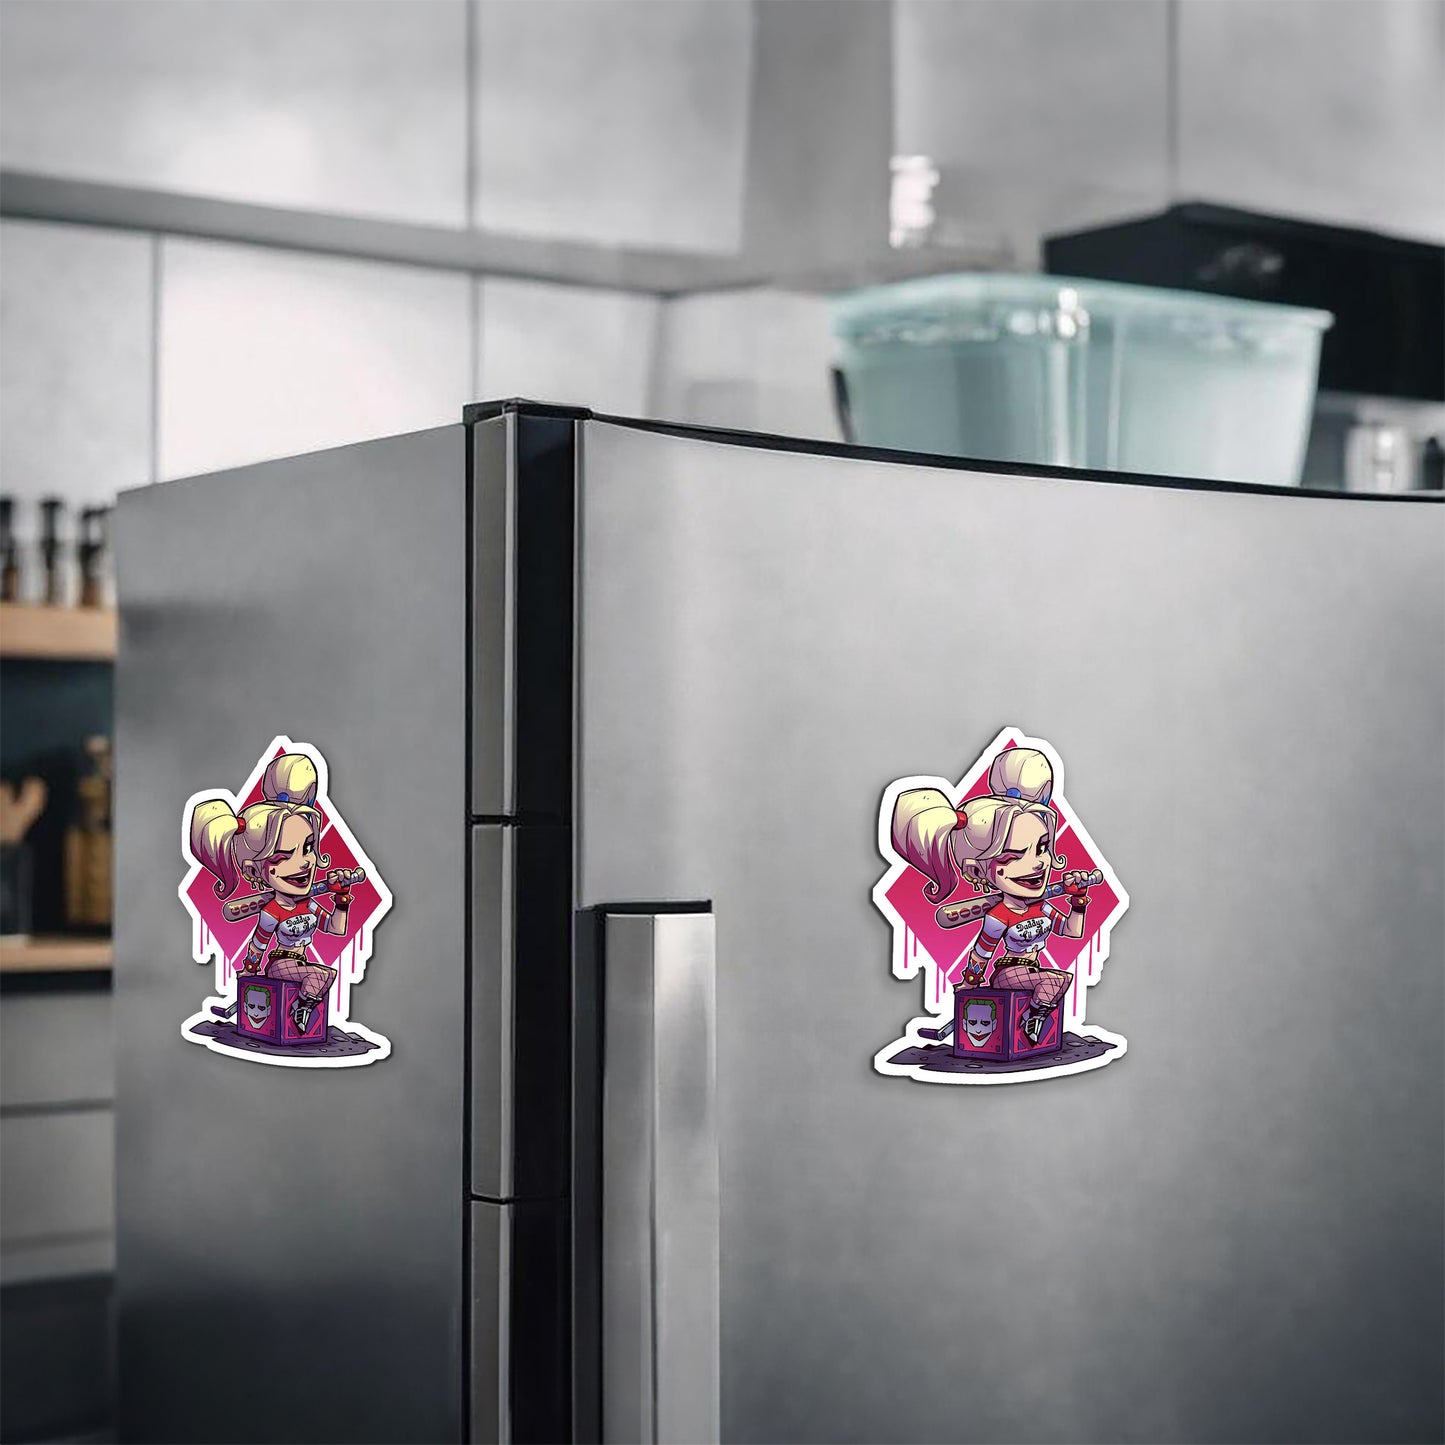 Harley Suicide Squad Magnetic Sticker